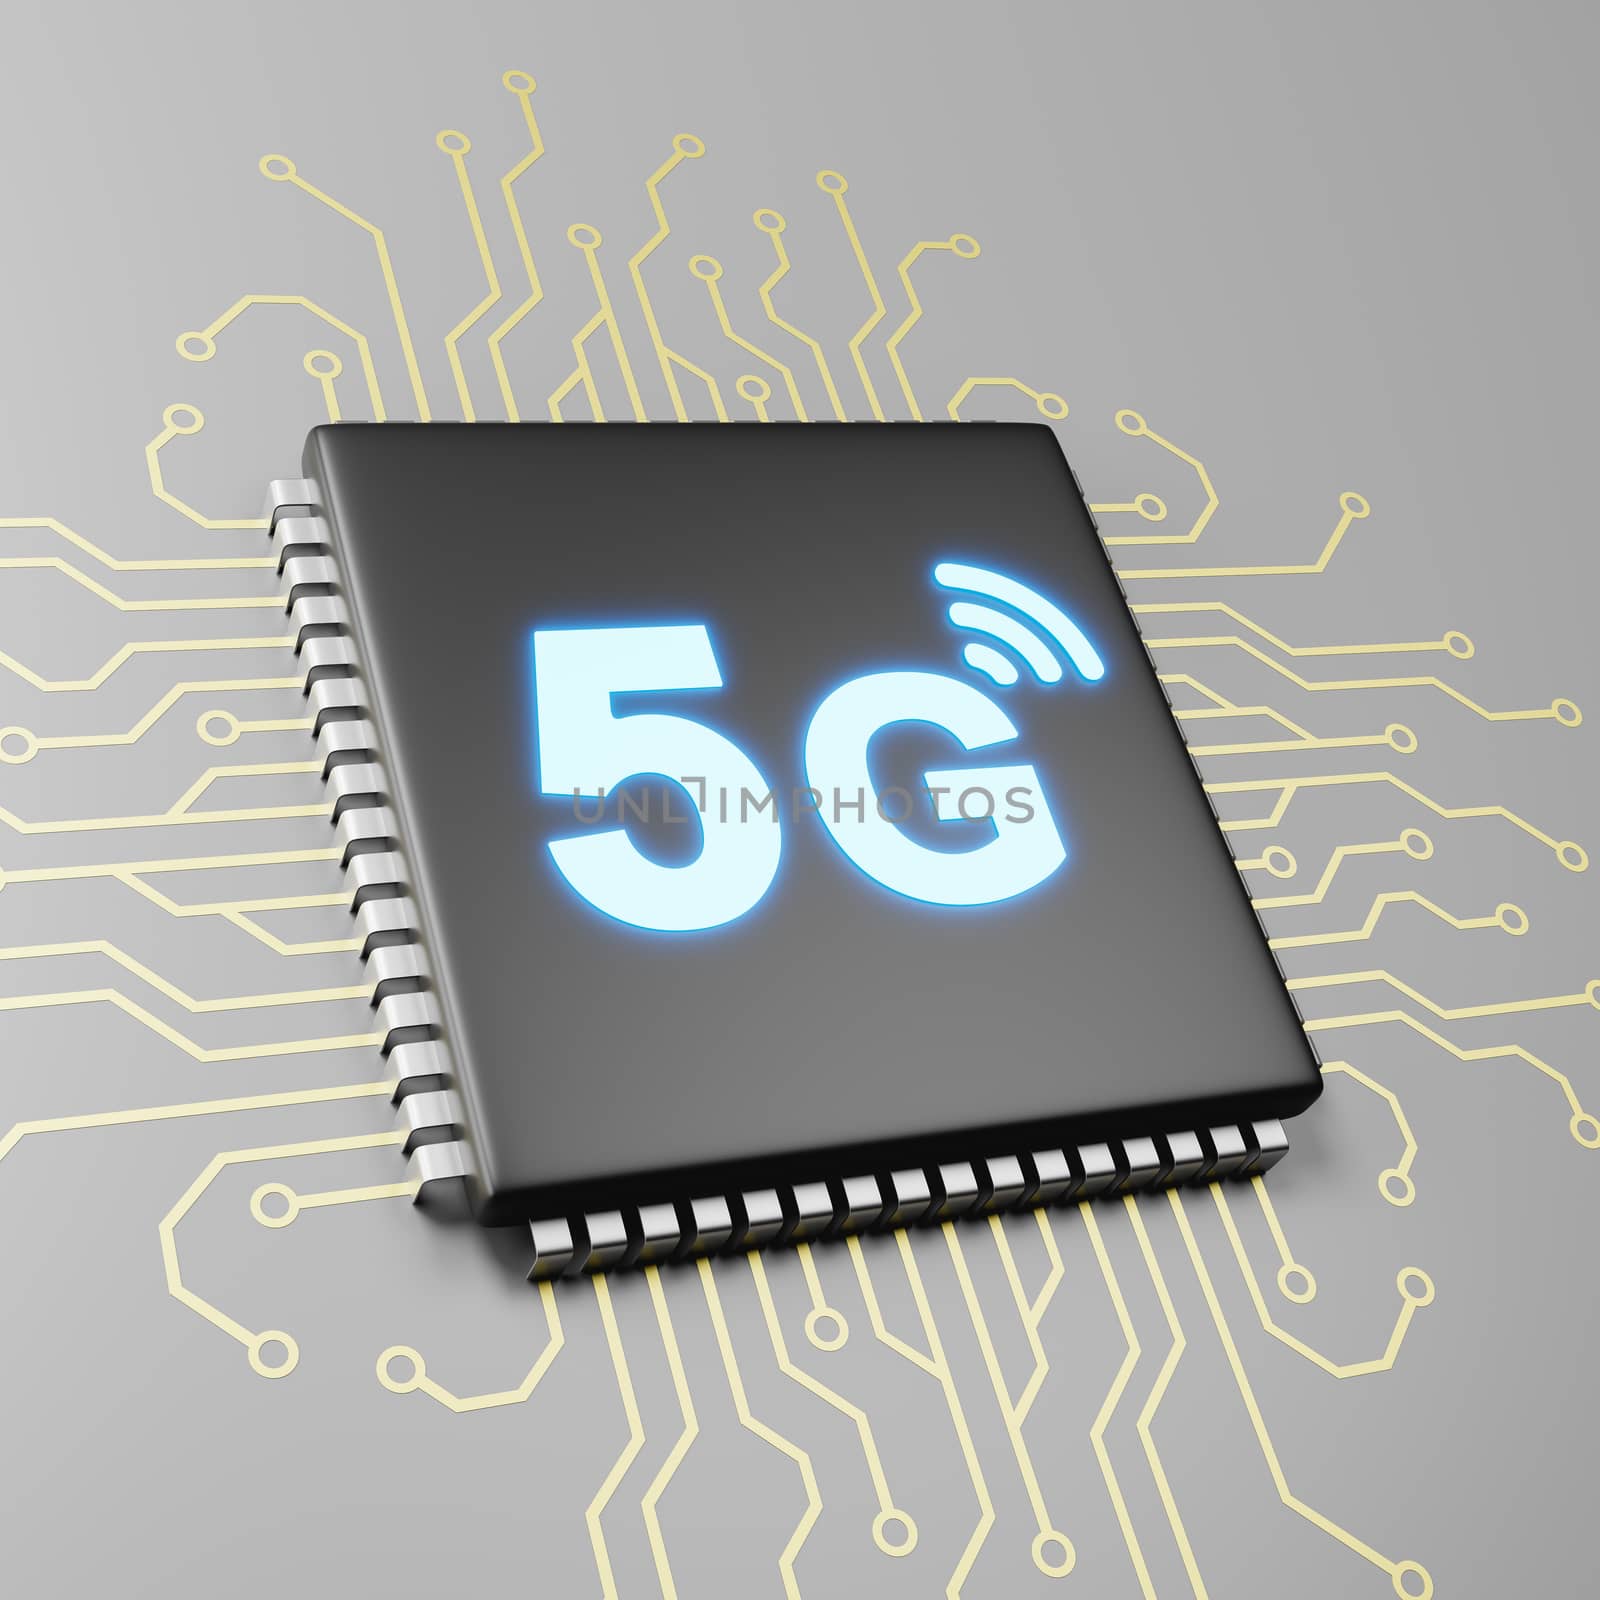 Computer Processor with 5G Text 3D Illustration, 5G Technology Concept